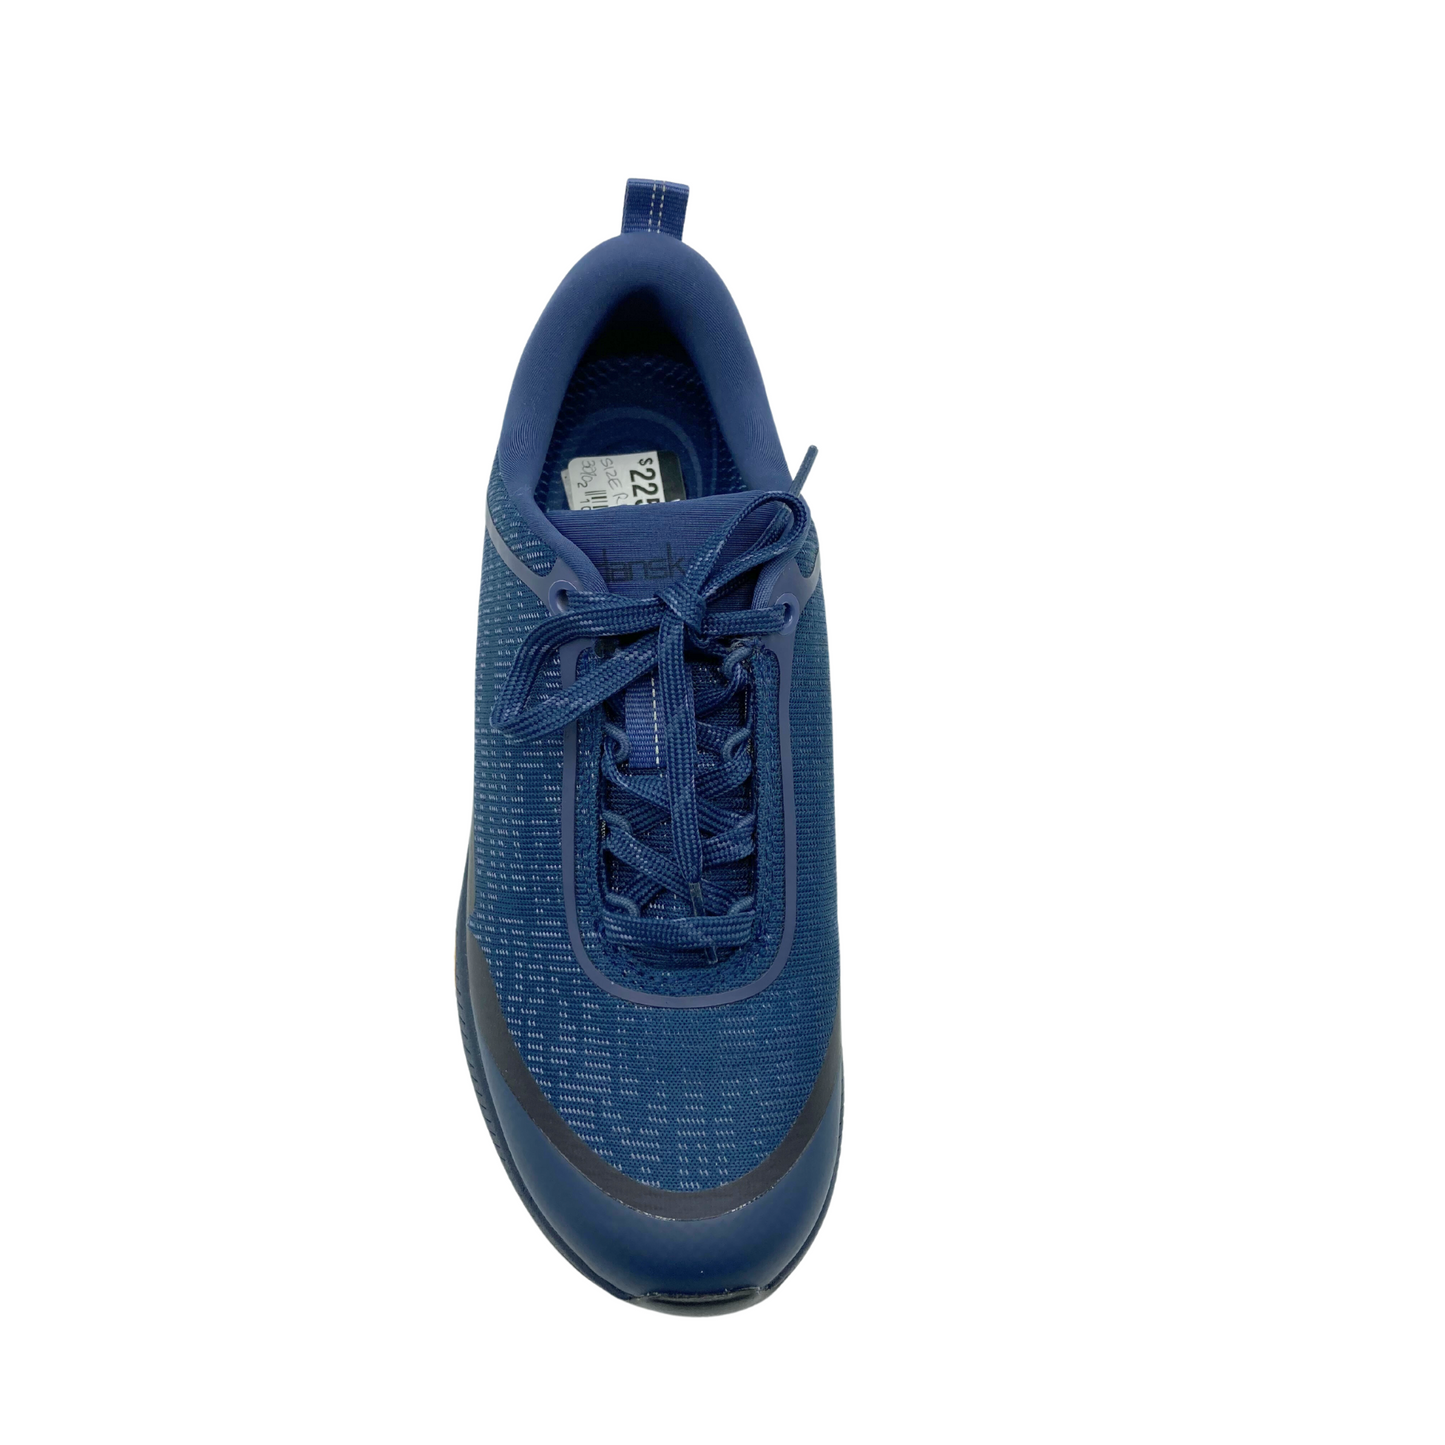 Top down  view of a sport sneaker with an ergonomic footbed